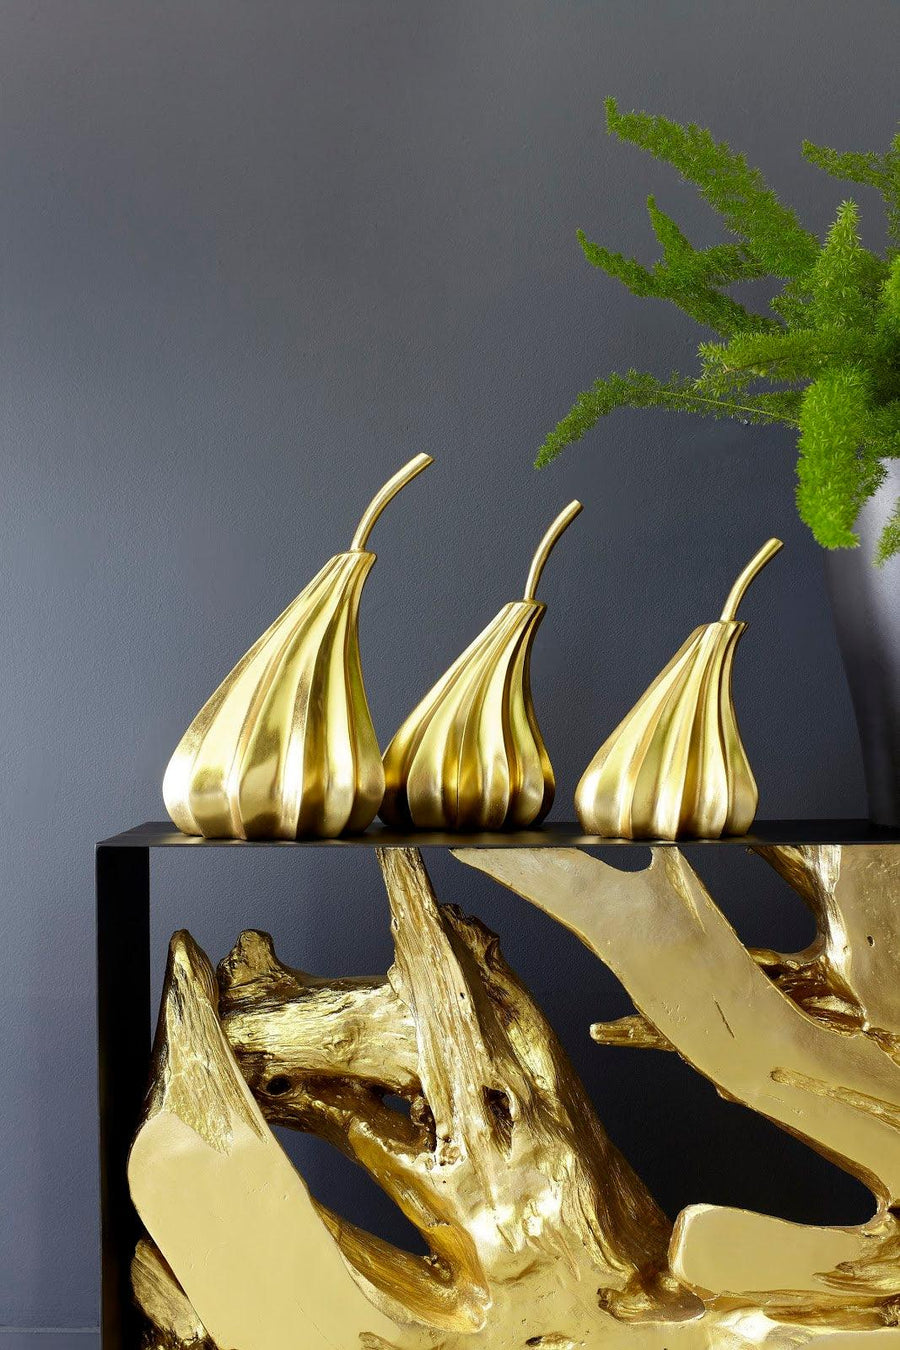 Hand-Dipped Gold Pears - Maison Vogue